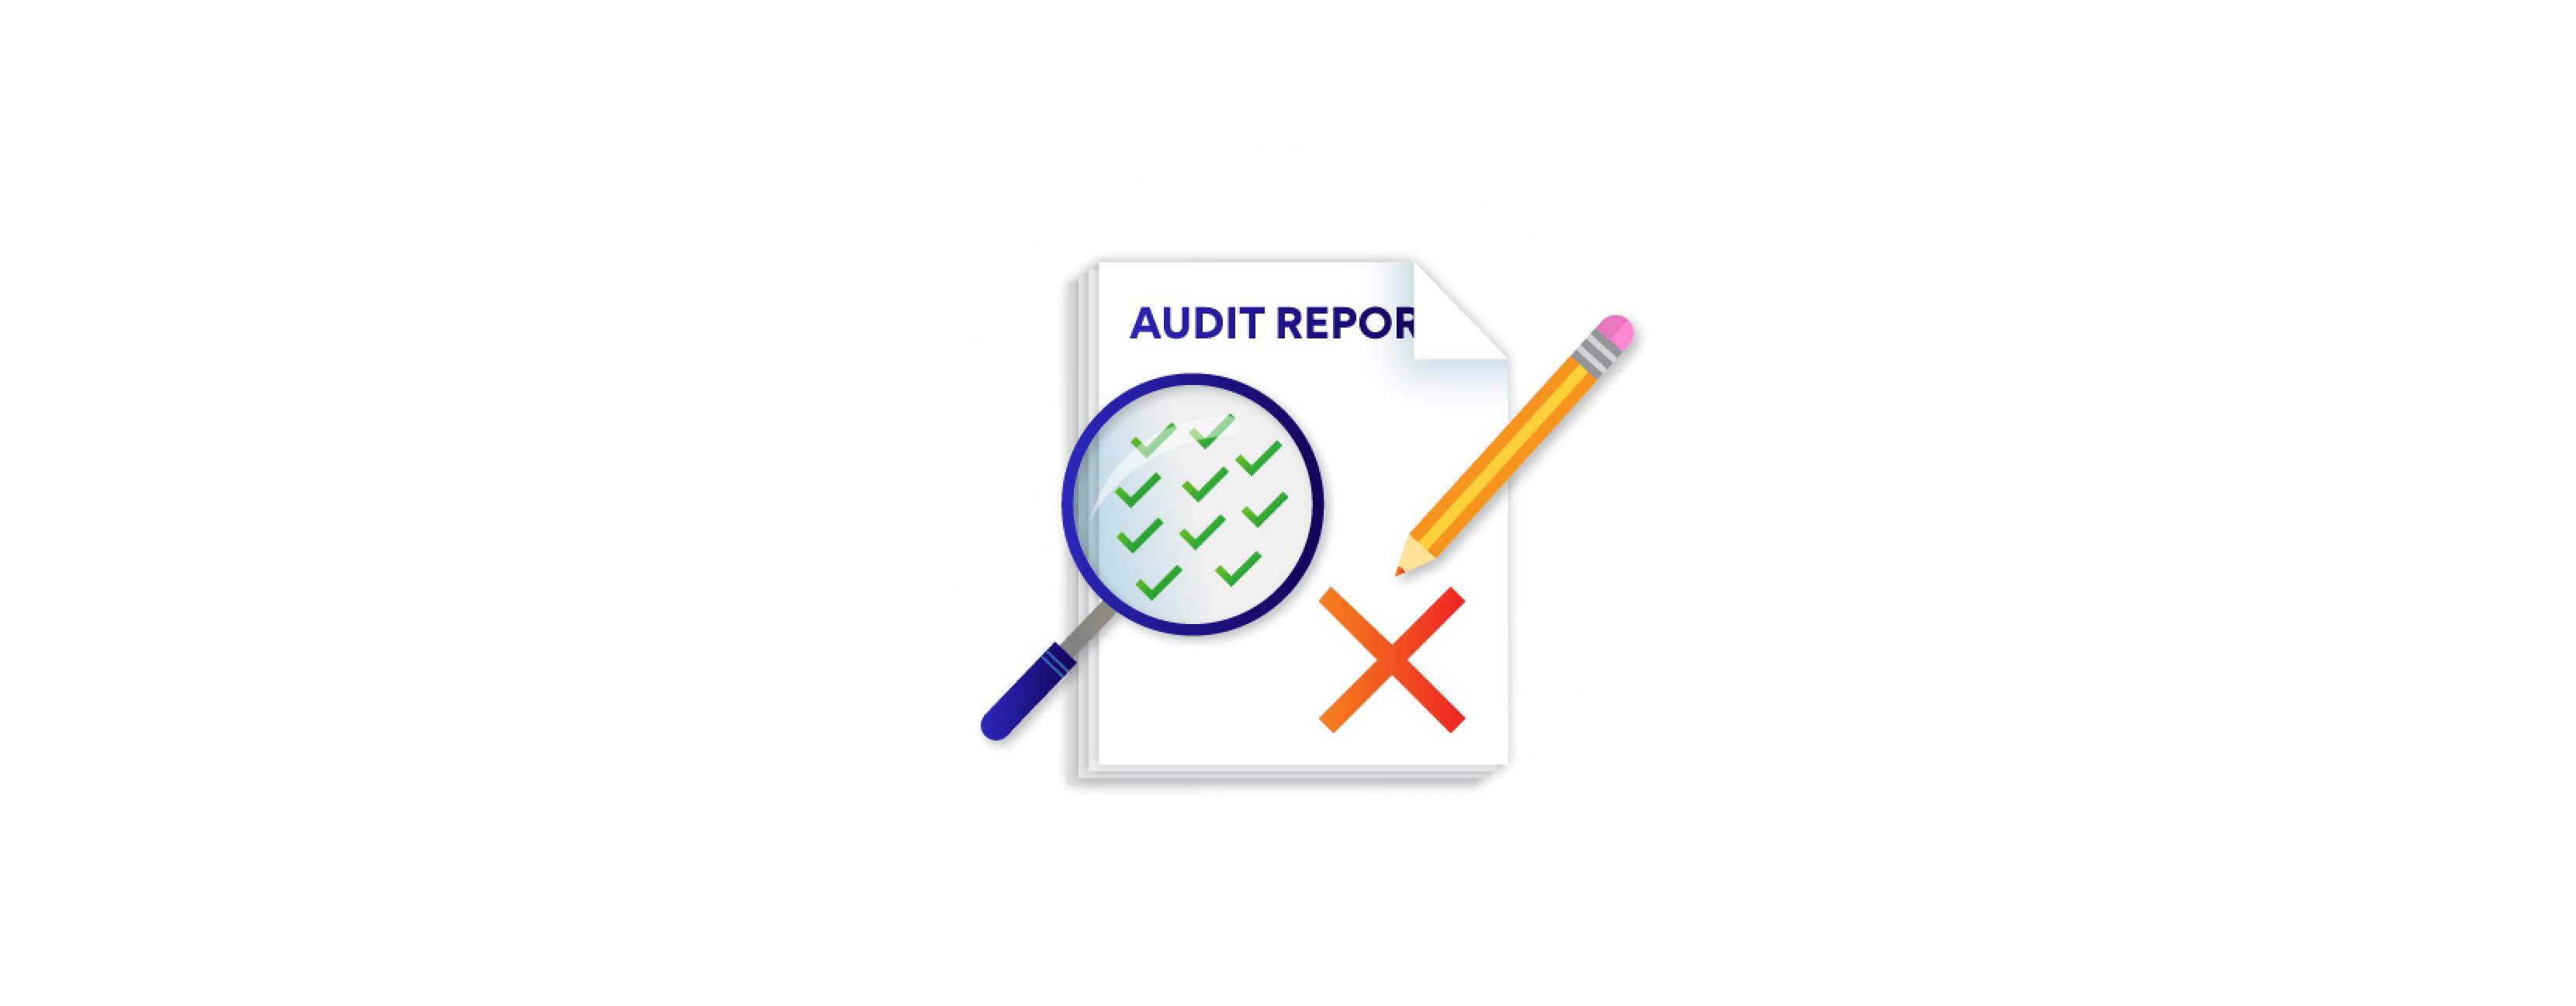 Should You Rate Audit Reports?